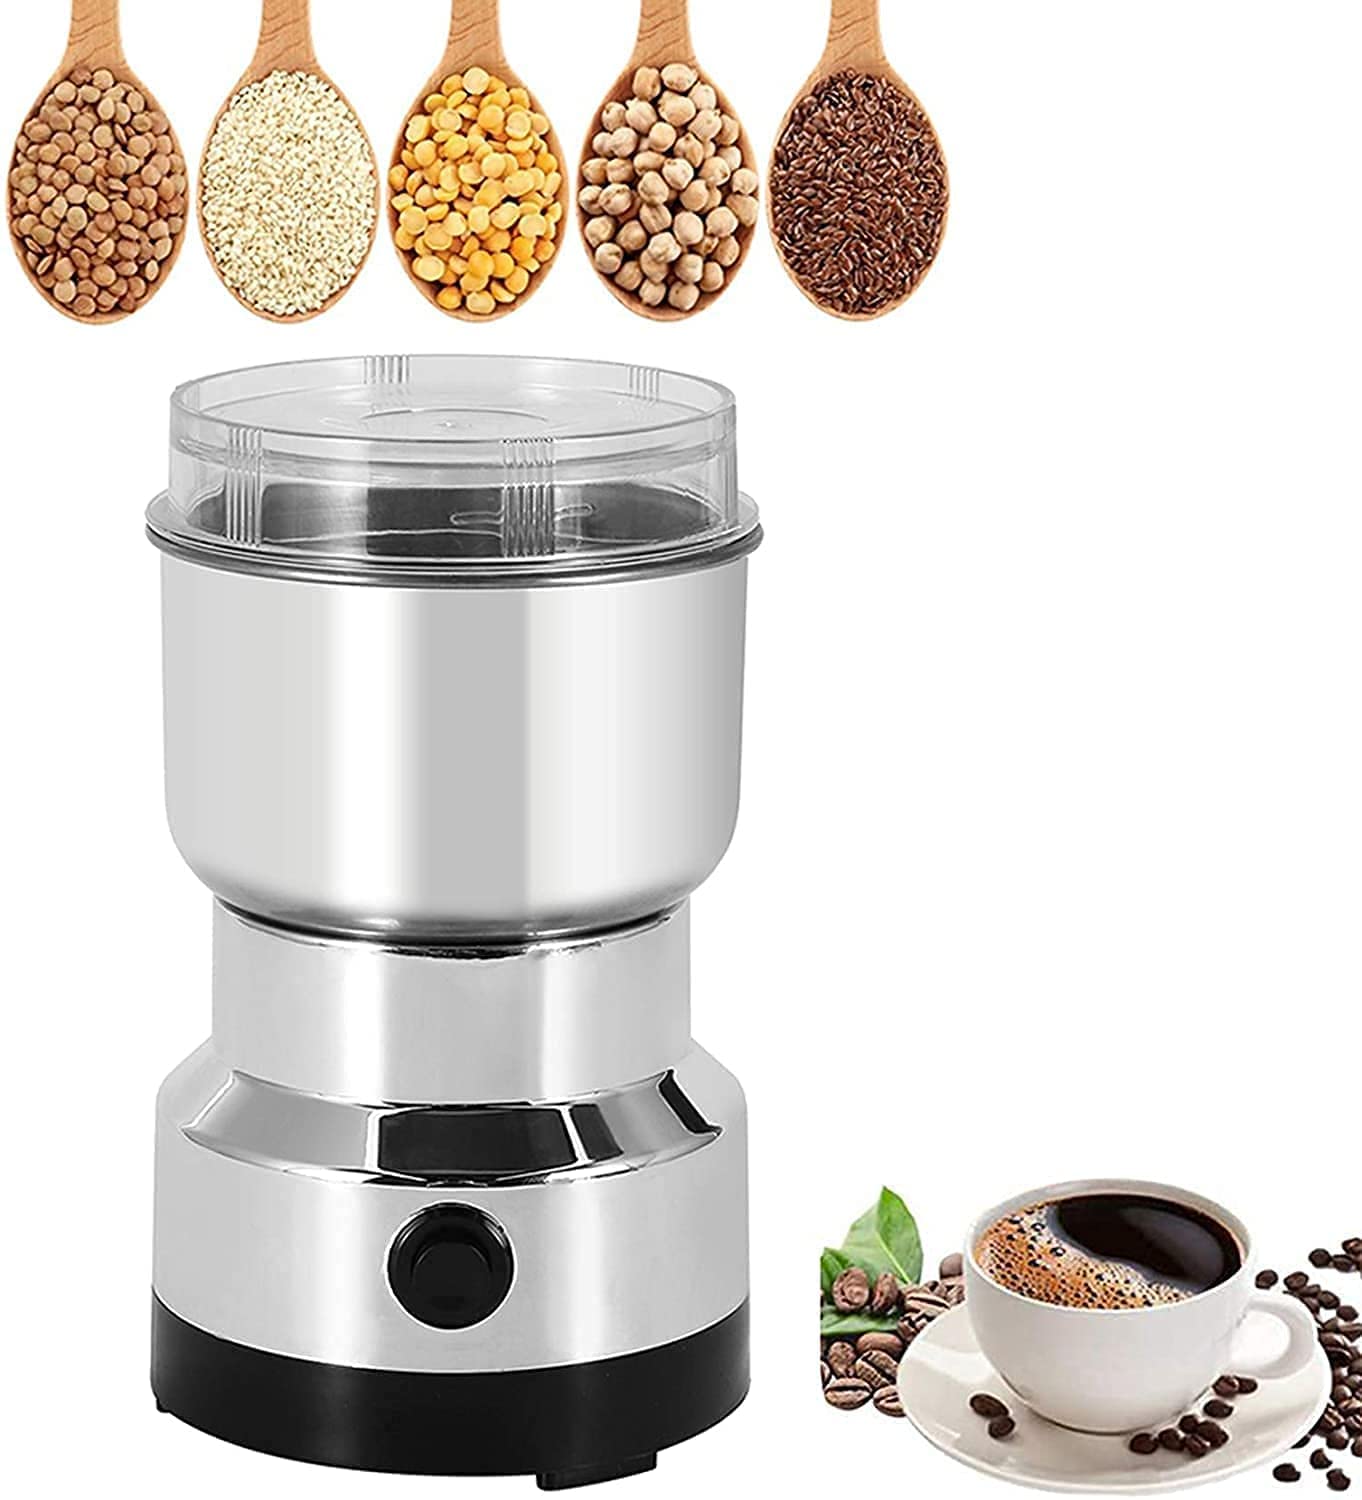 2465 Multi-Functional Electric Stainless Steel Herbs Spices Nuts Grain Grinder with Stainless Steel Bowl, Portable Coffee Bean Seasonings Spices Mill Powder Machine Grinder Machine for Home and Office